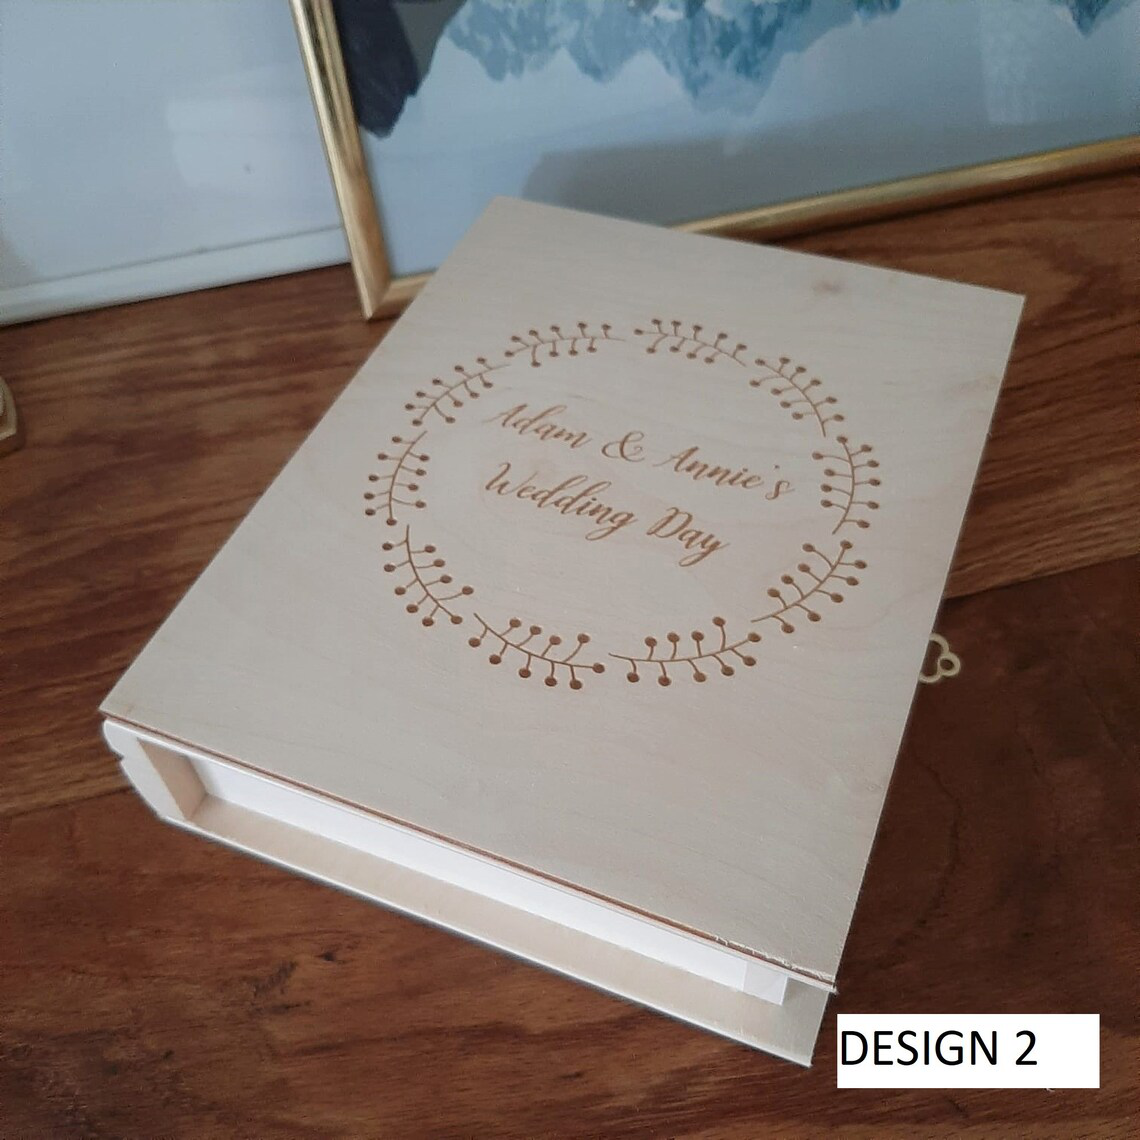 Personalized Wooden Book Shaped Box - DESIGN 2